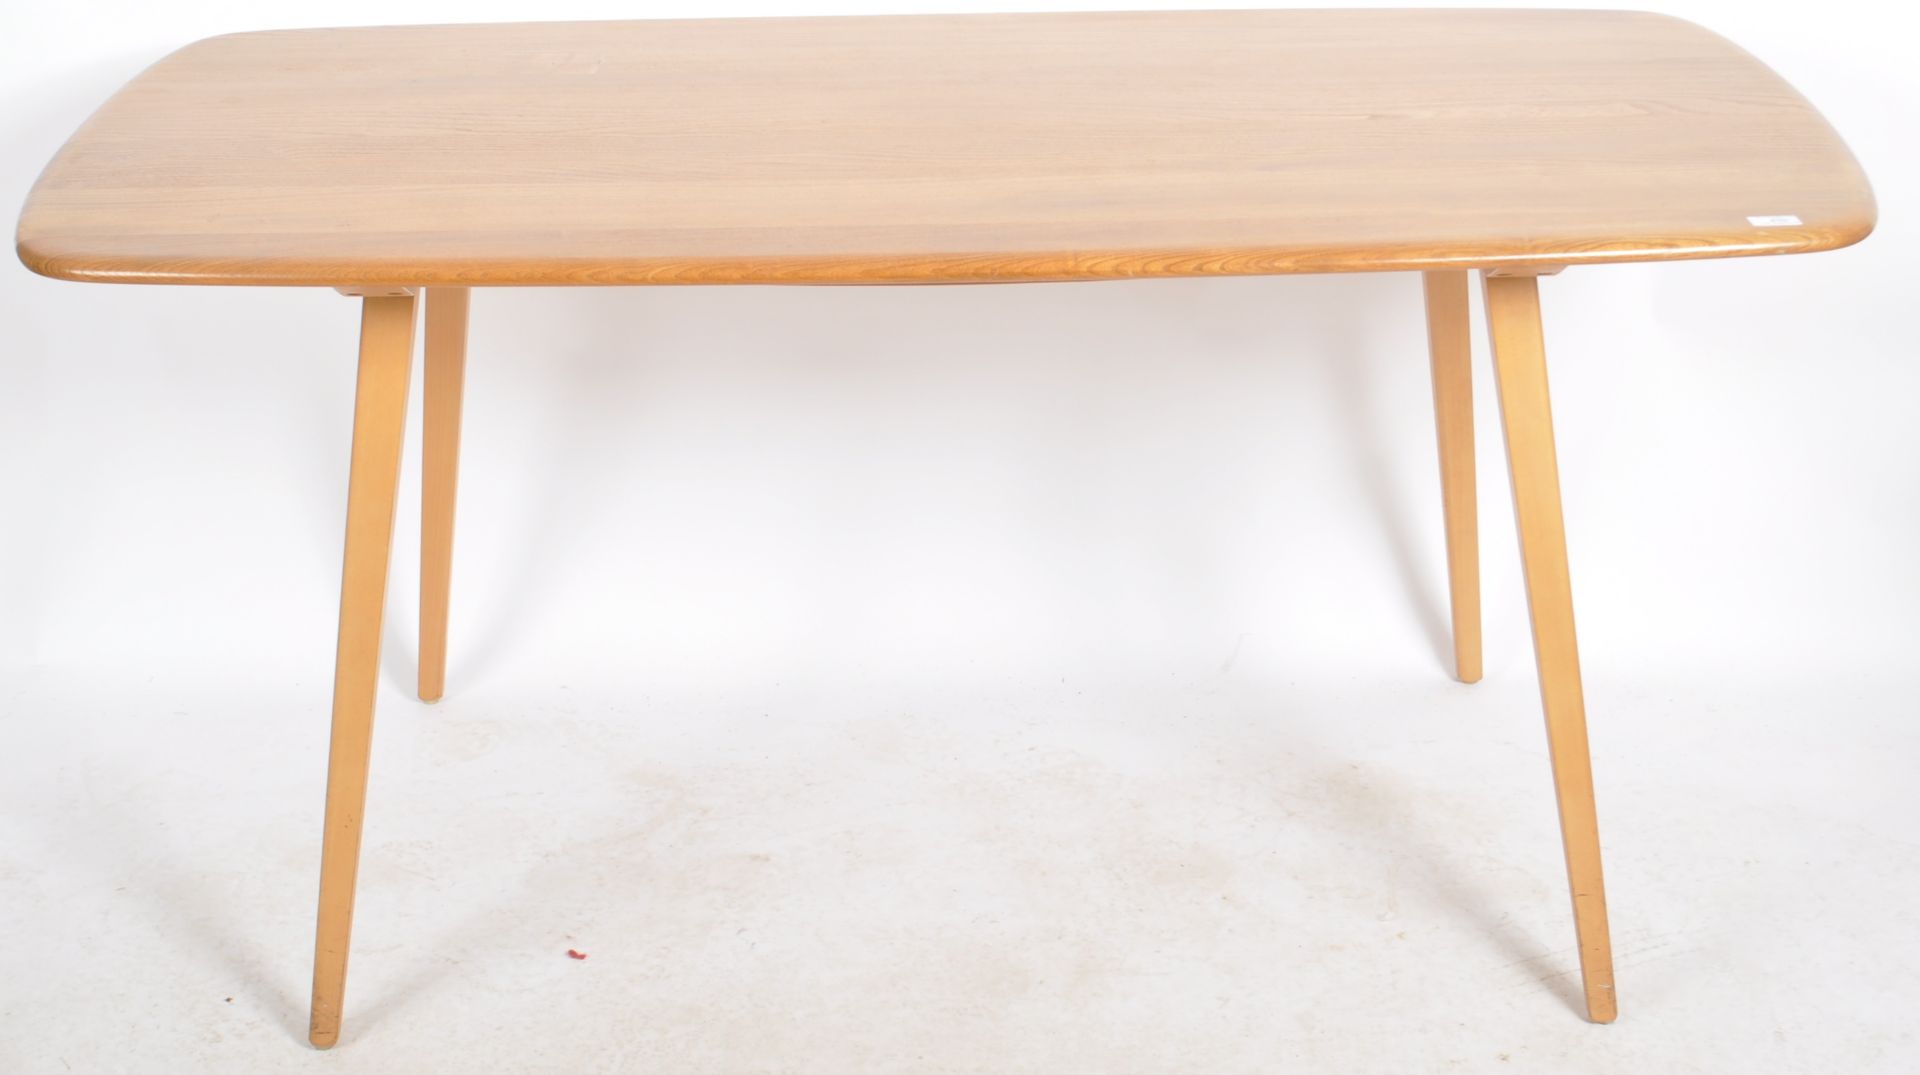 ERCOL - RETRO MID CENTURY BEECH AND ELM DINING TABLE - Image 2 of 4